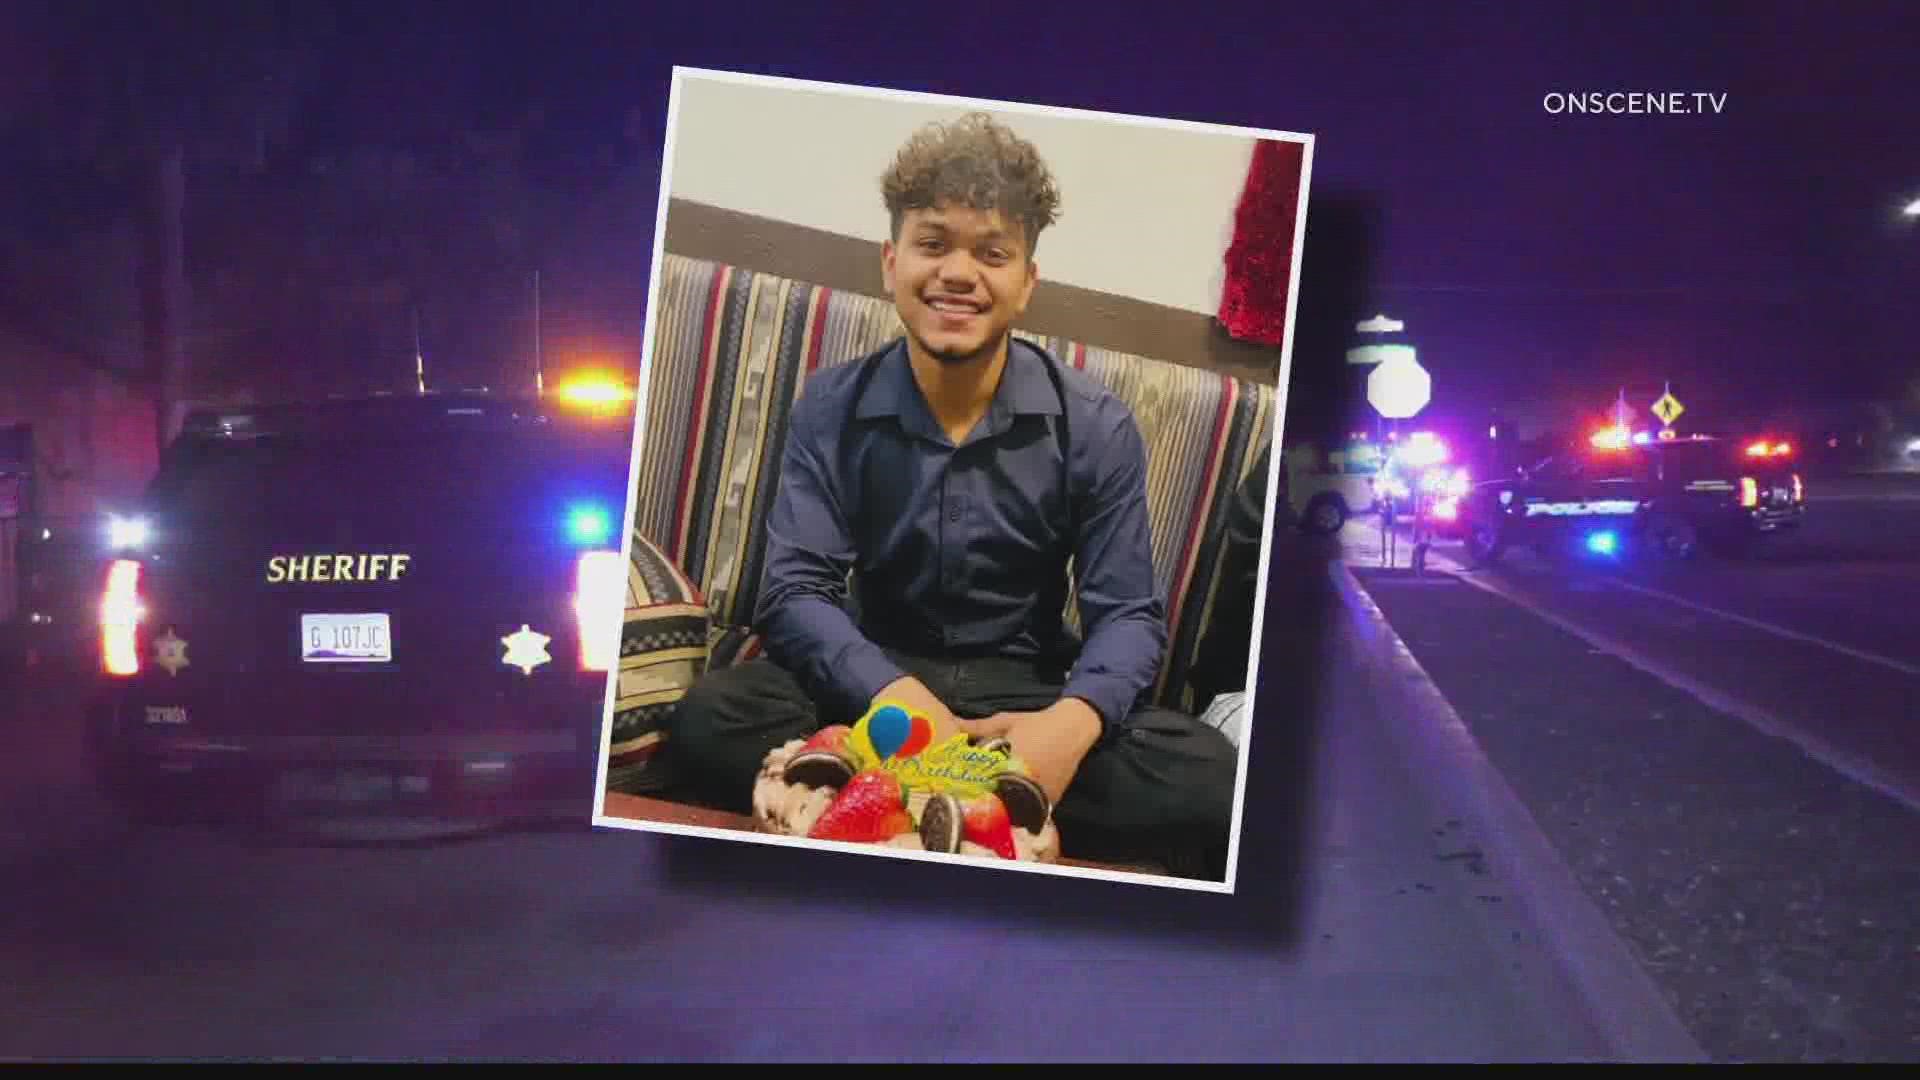 An investigation is underway after a teenager was shot and killed in Goodyear over the weekend.